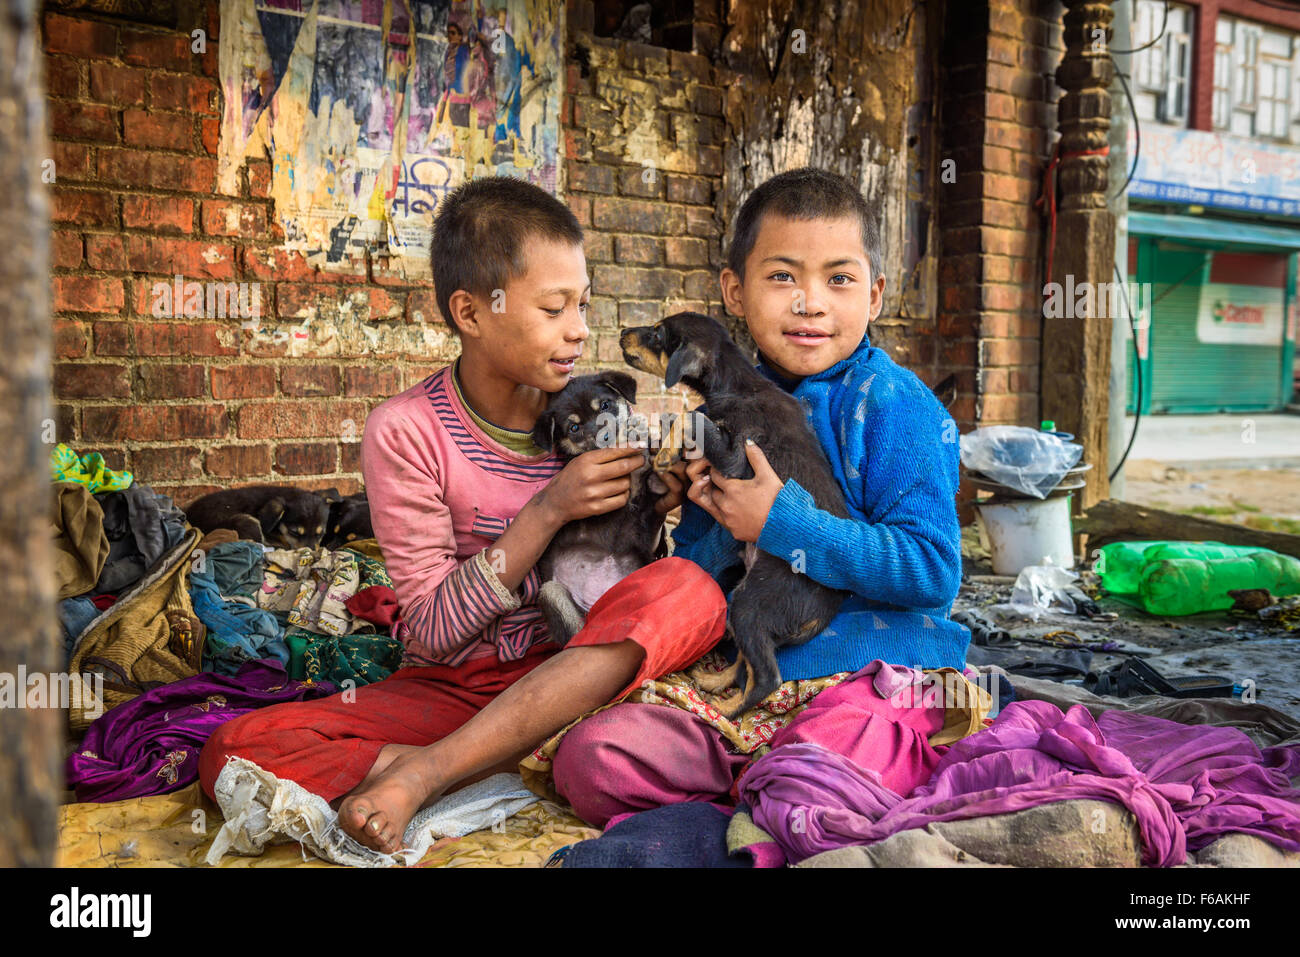 Homeless children playing with puppies in the street of Kathmandu. Stock Photo